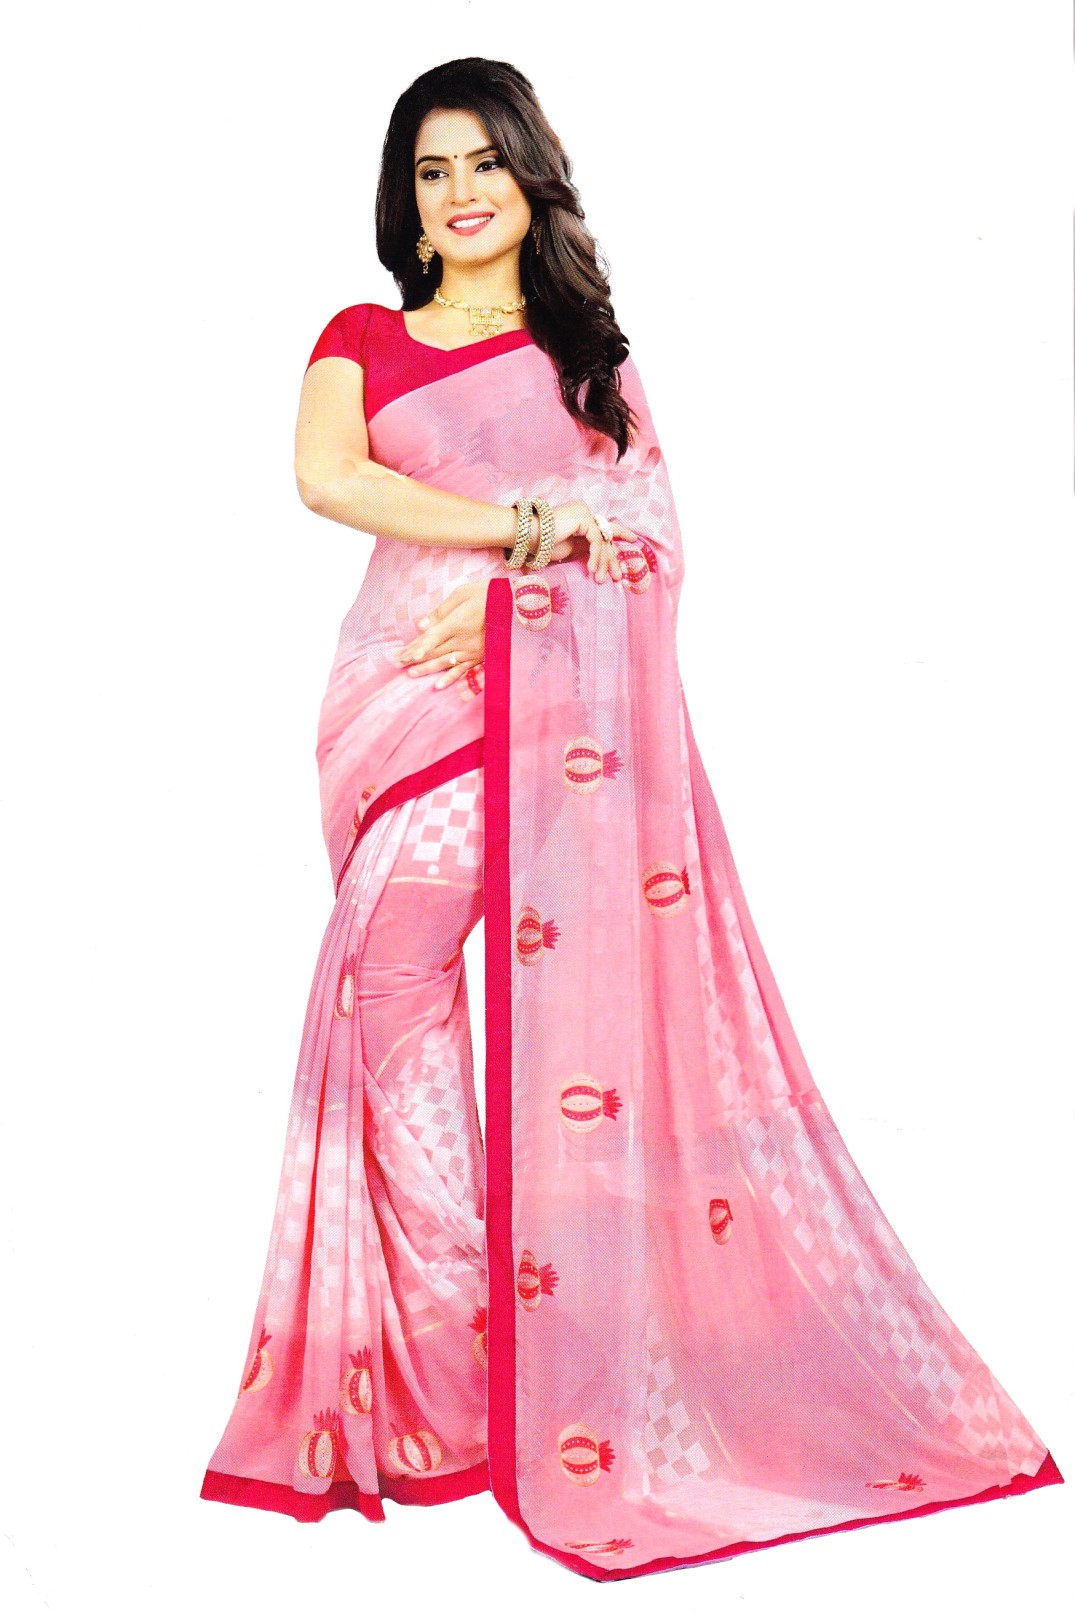 SAREE S-GEORGETTE-DYED EMB-PAL 8663